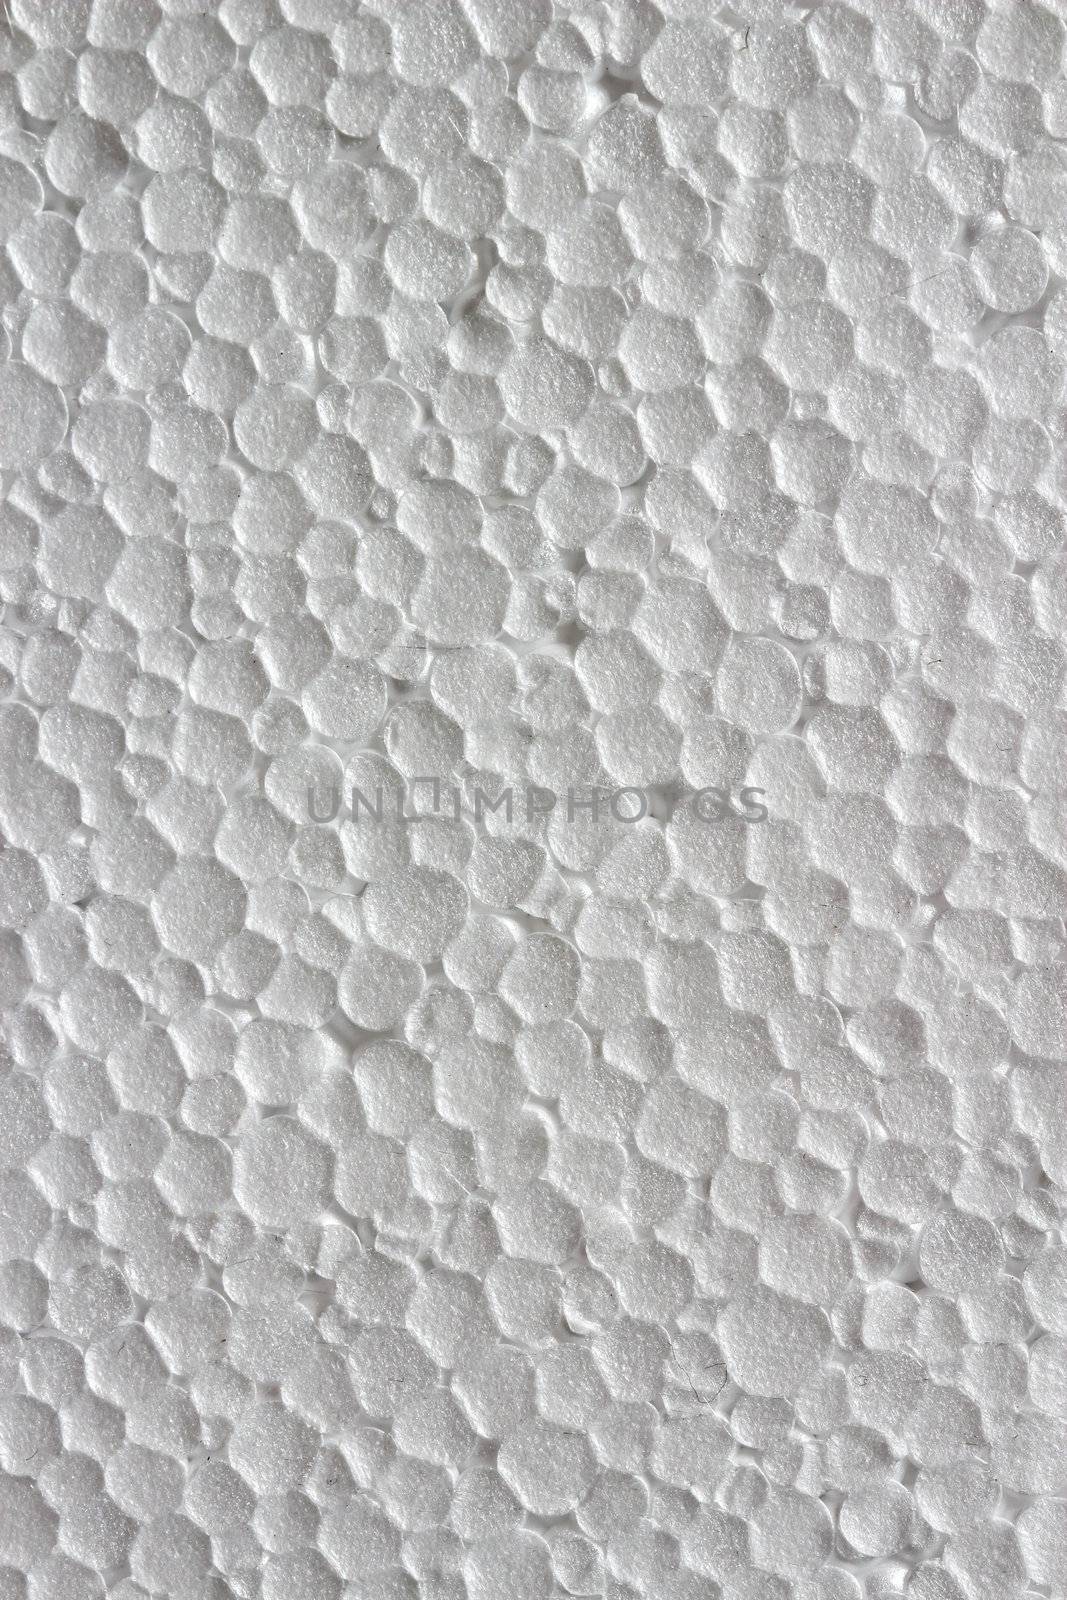 seamless texture of white polystyrene surface in closeup